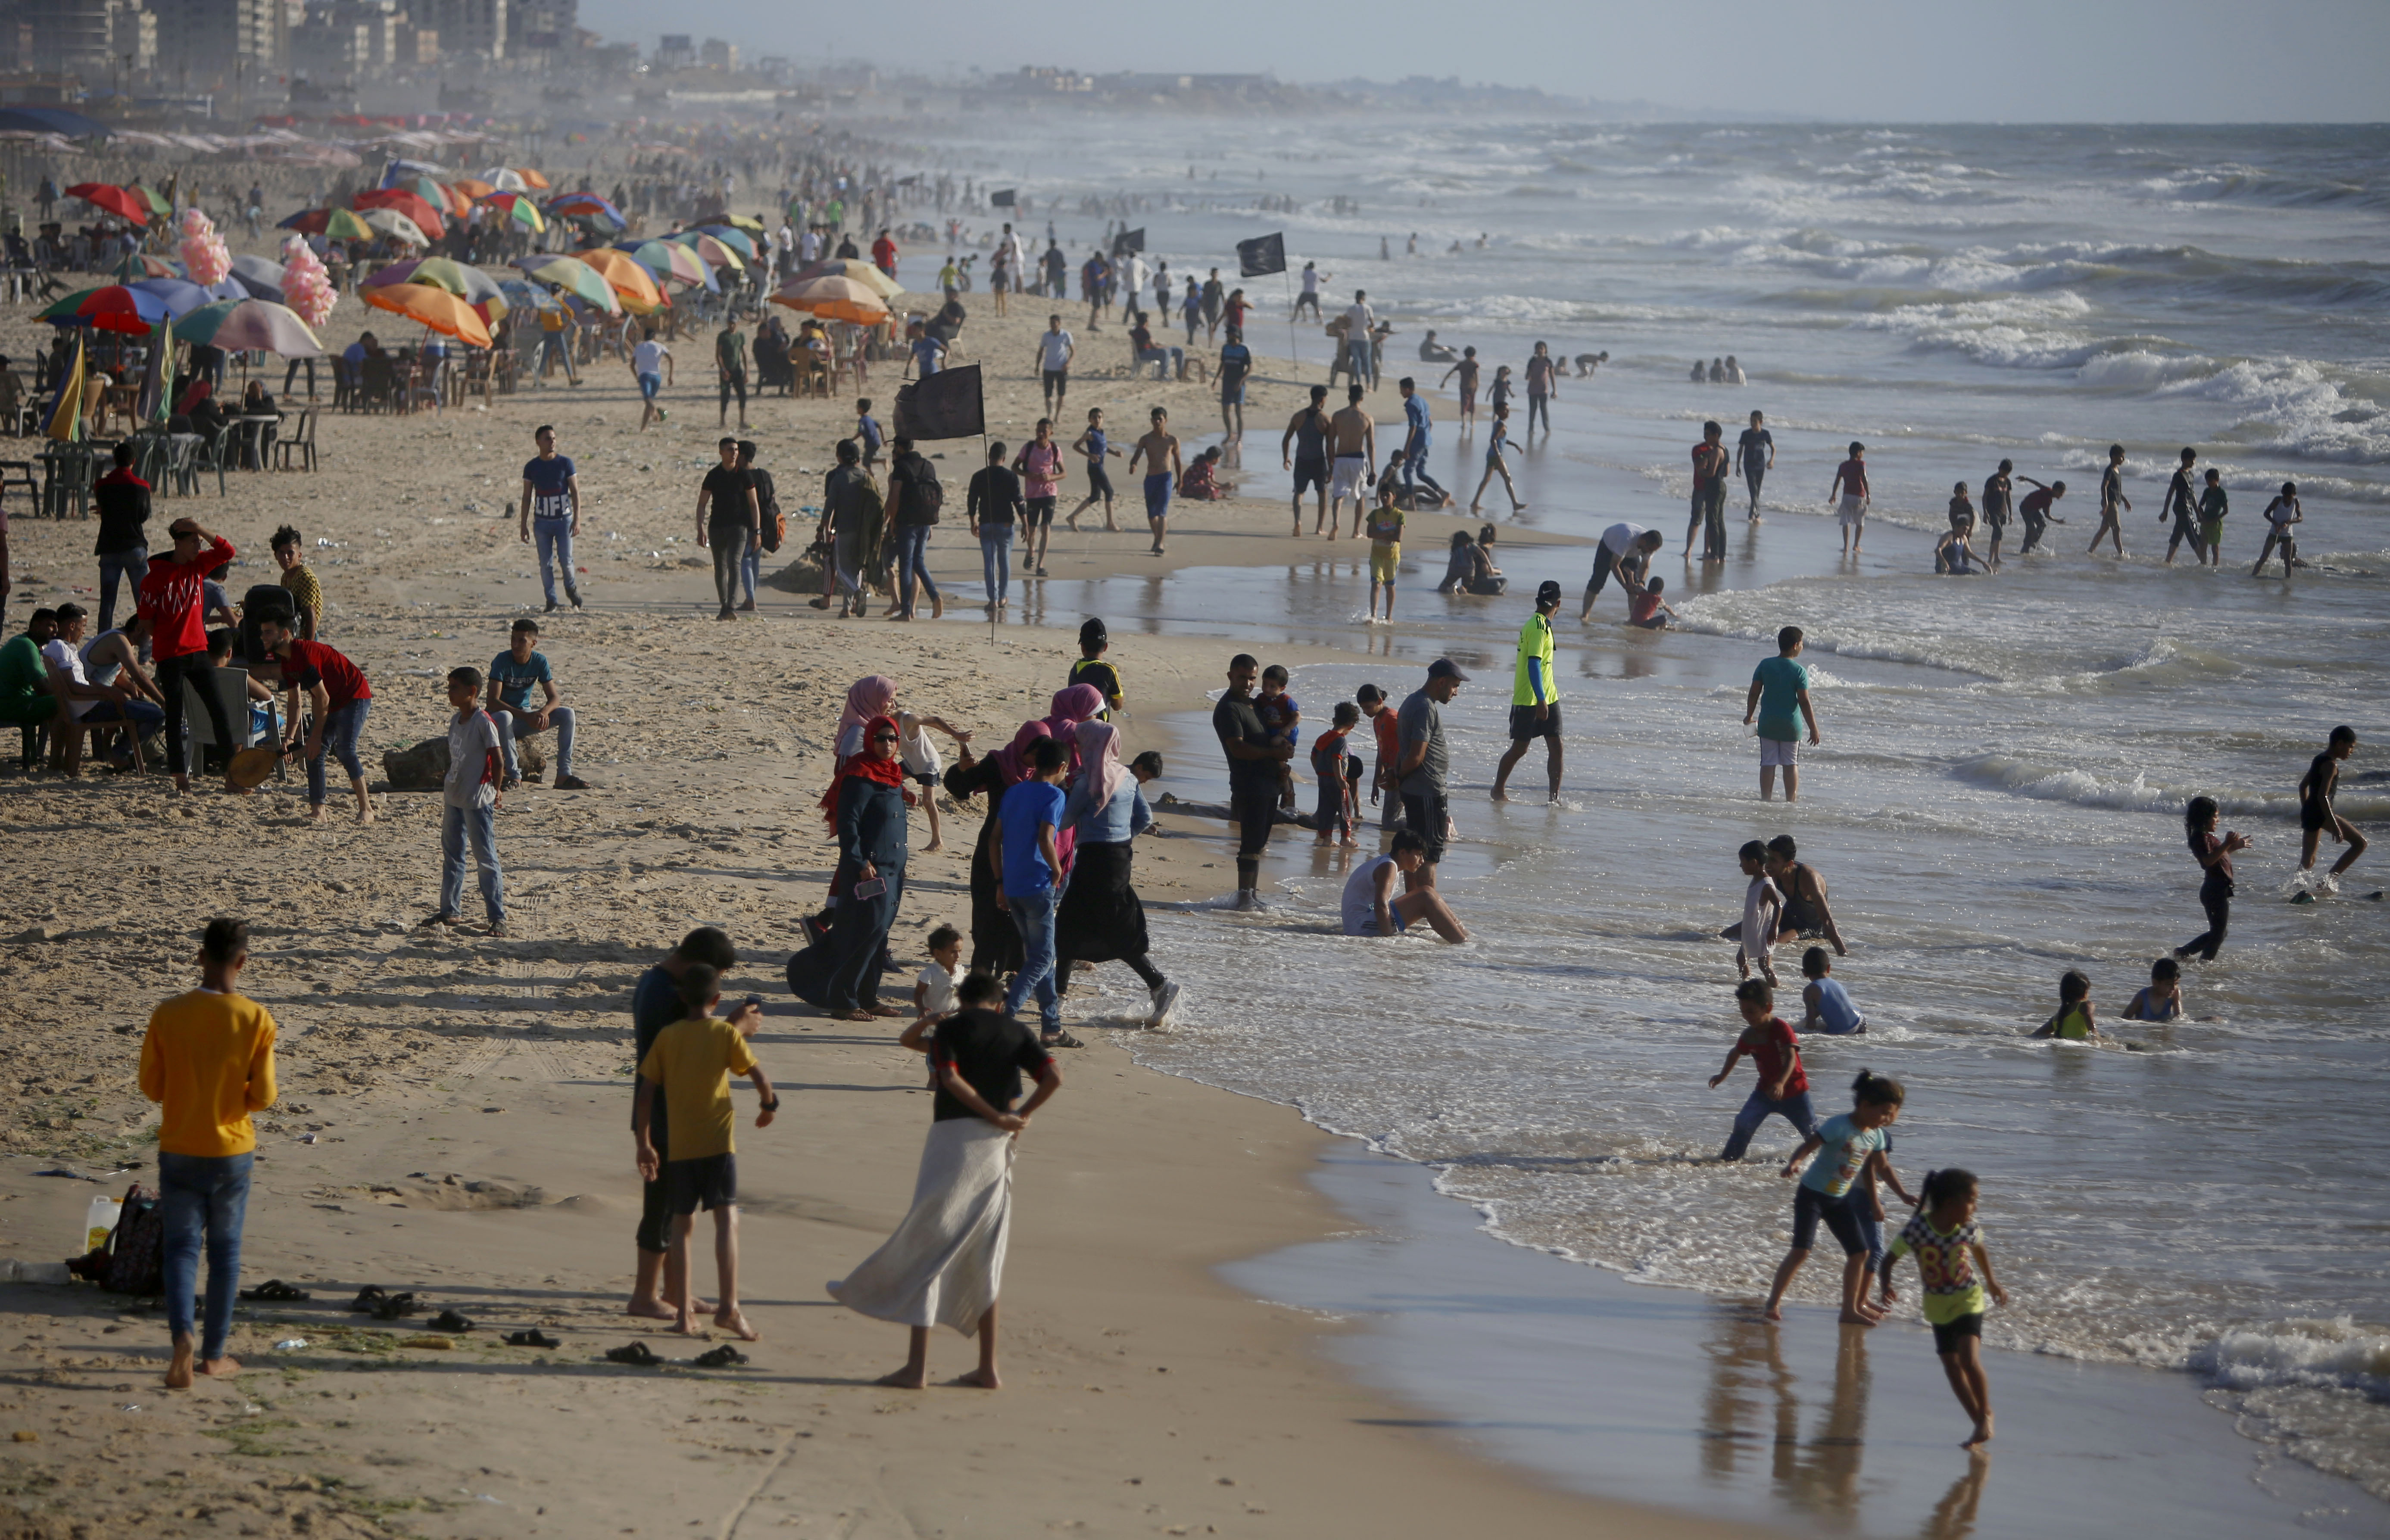 Palestinians enjoy the beach of the Mediterranean sea in Gaza City, Friday, June 19, 2020. The beach is one of the few open public spaces in this densely populated city. (AP Photo/Hatem Moussa)